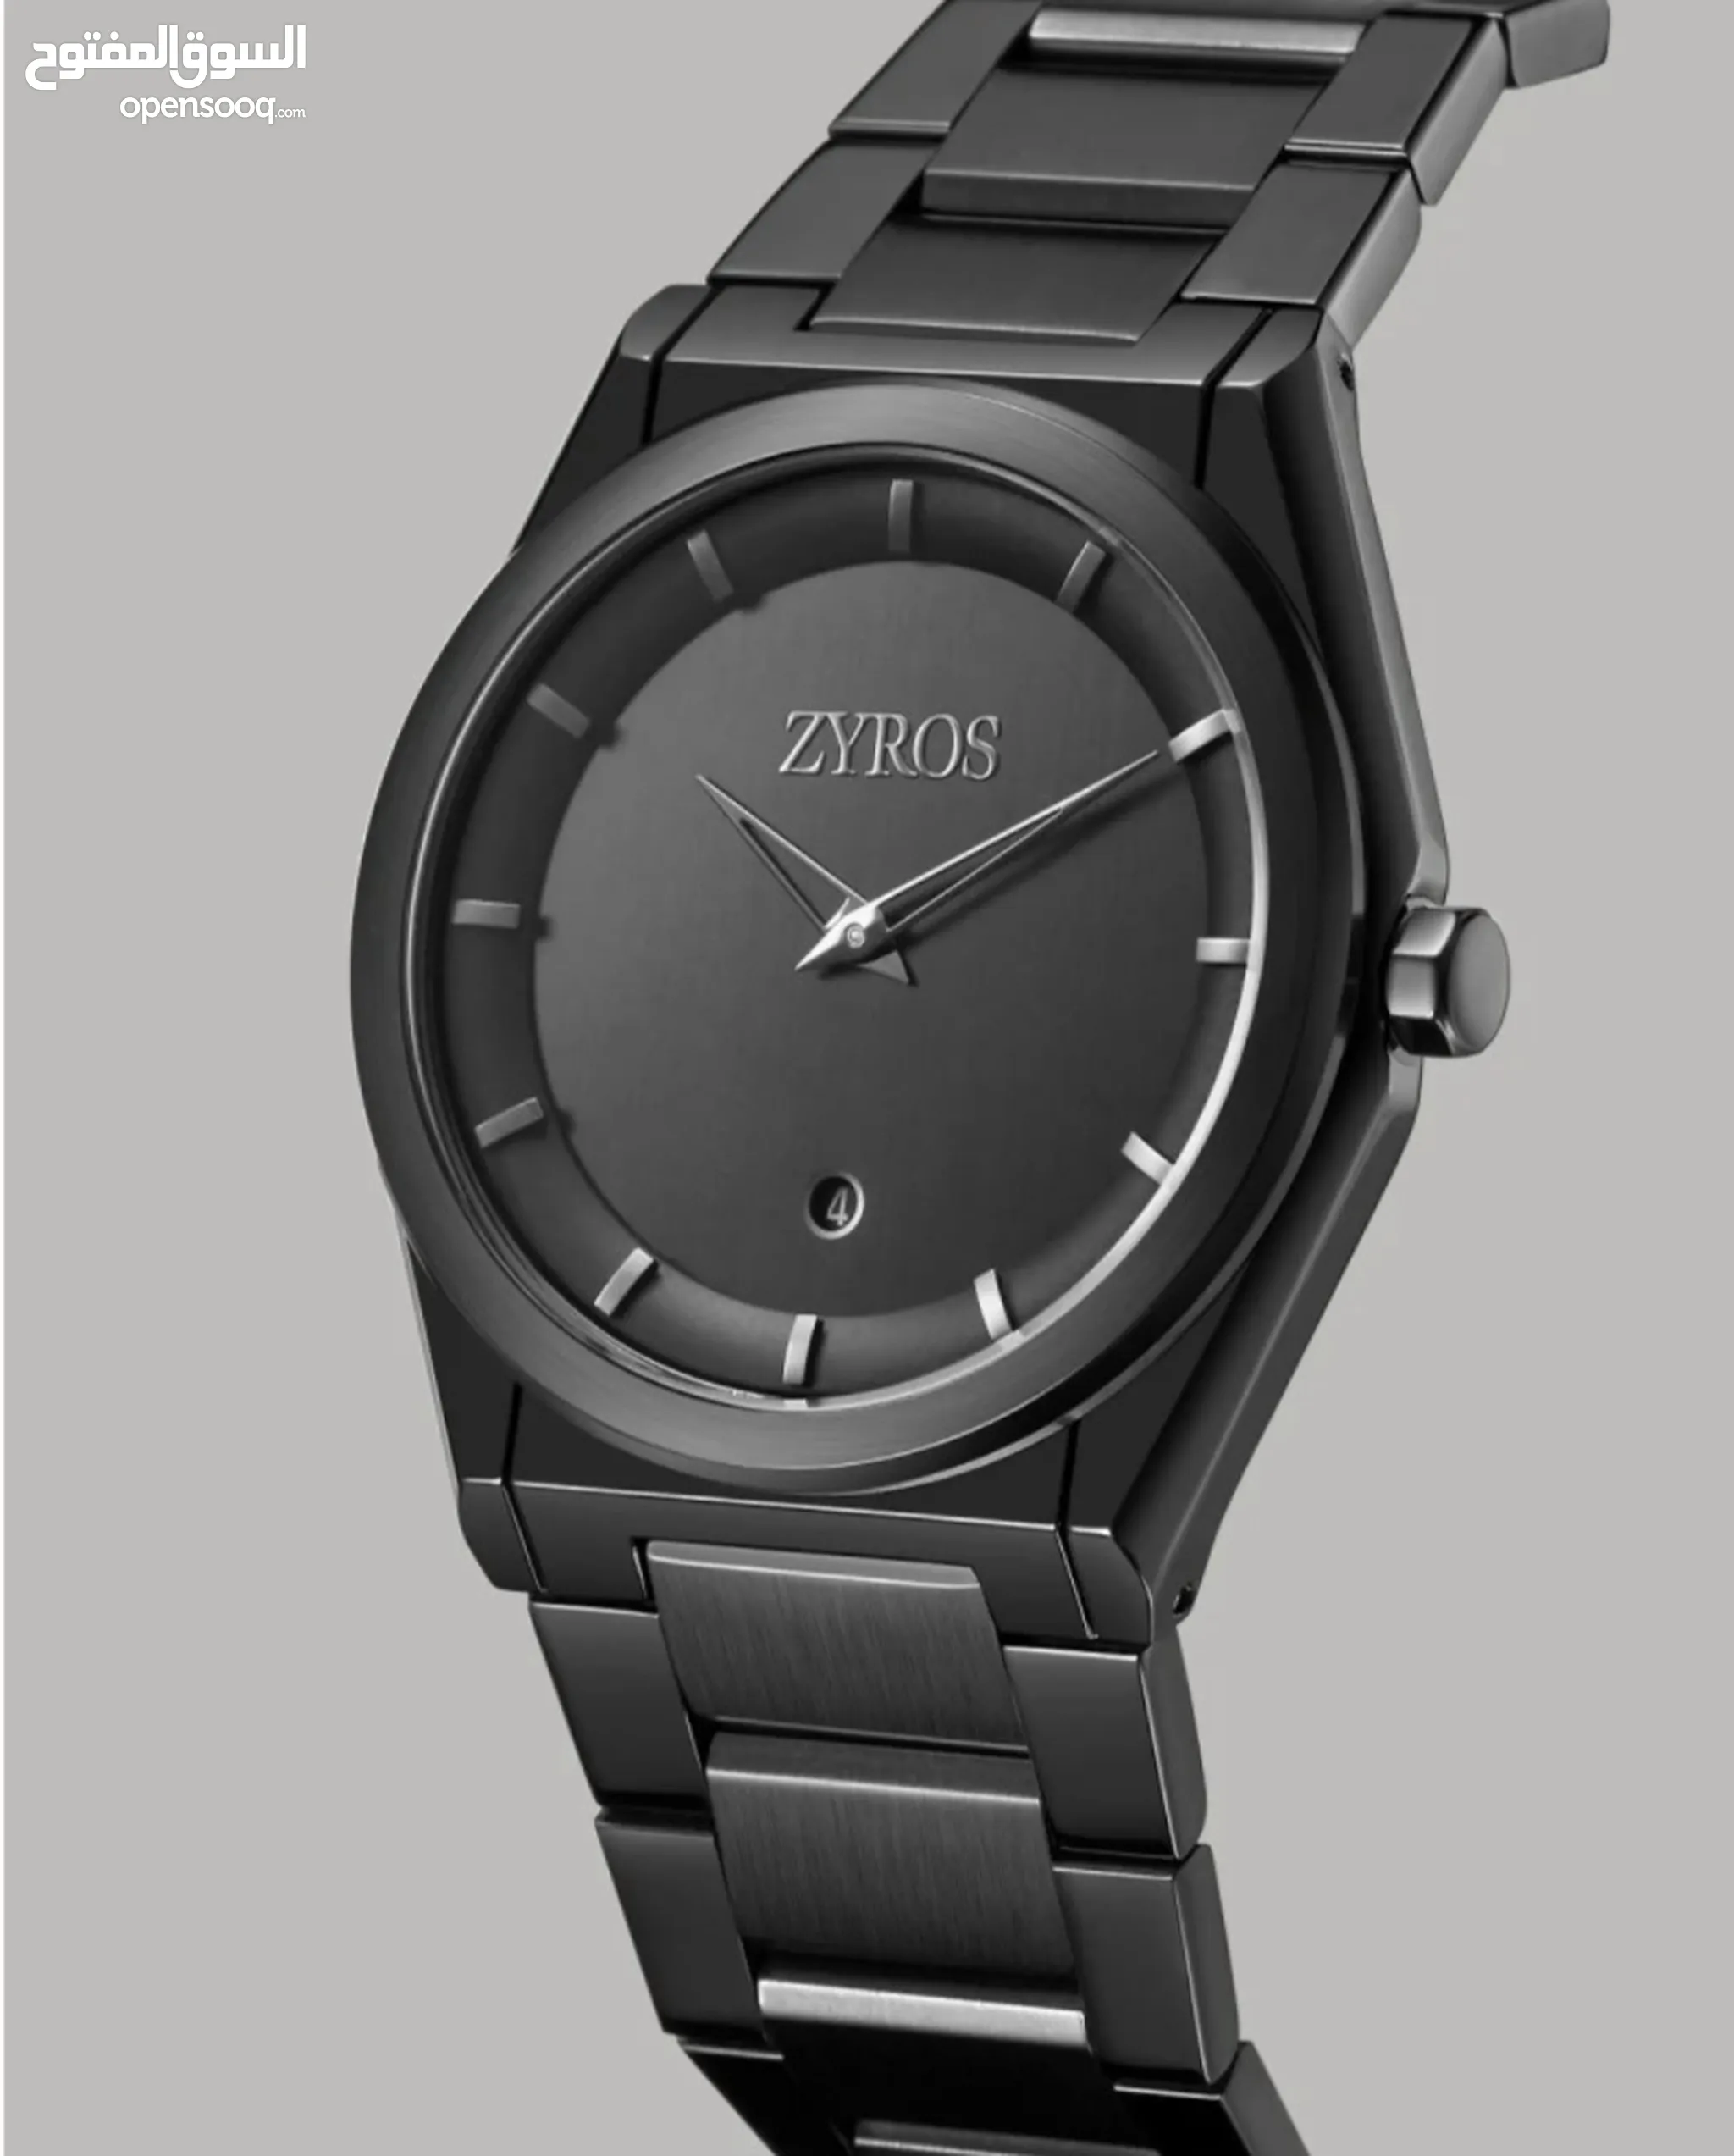 Zyros Analog Watch For Men - Stainless Steel , Multi Color - ZY239M060611  price from souq in Saudi Arabia - Yaoota!